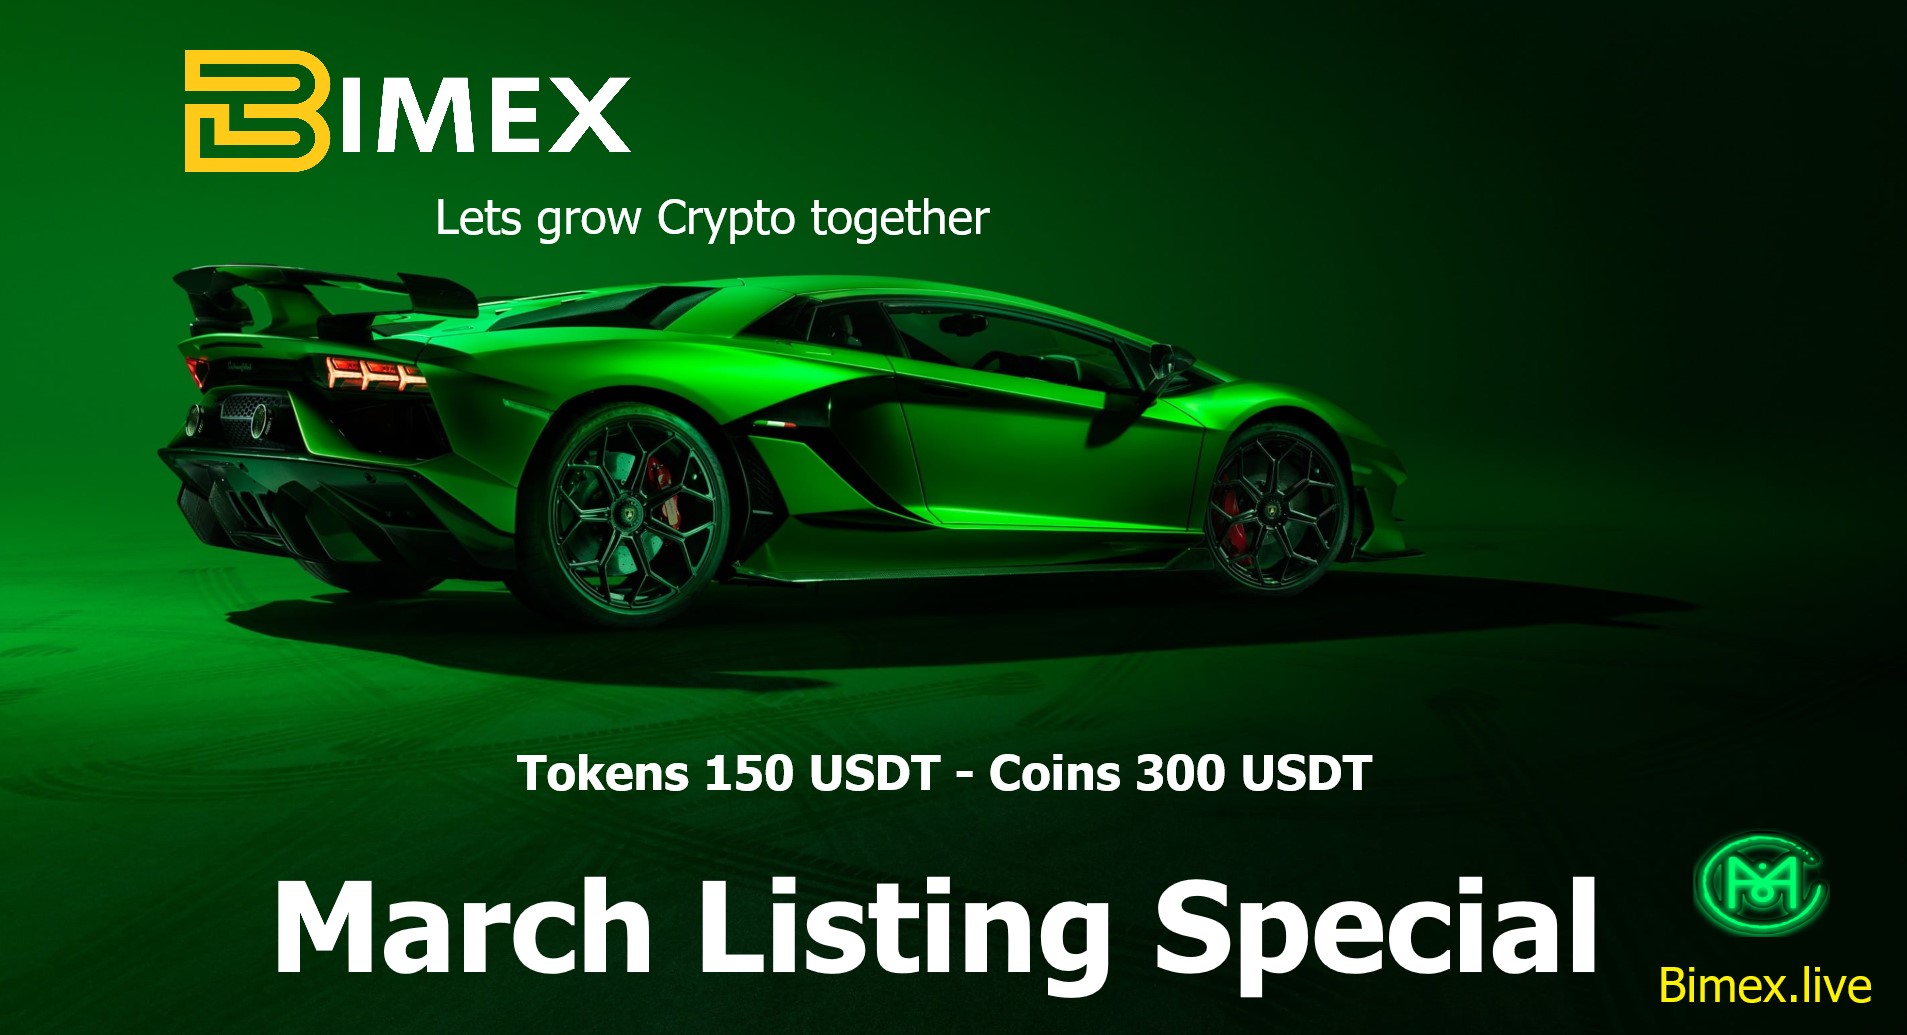 List your token for 150.00 USDT only